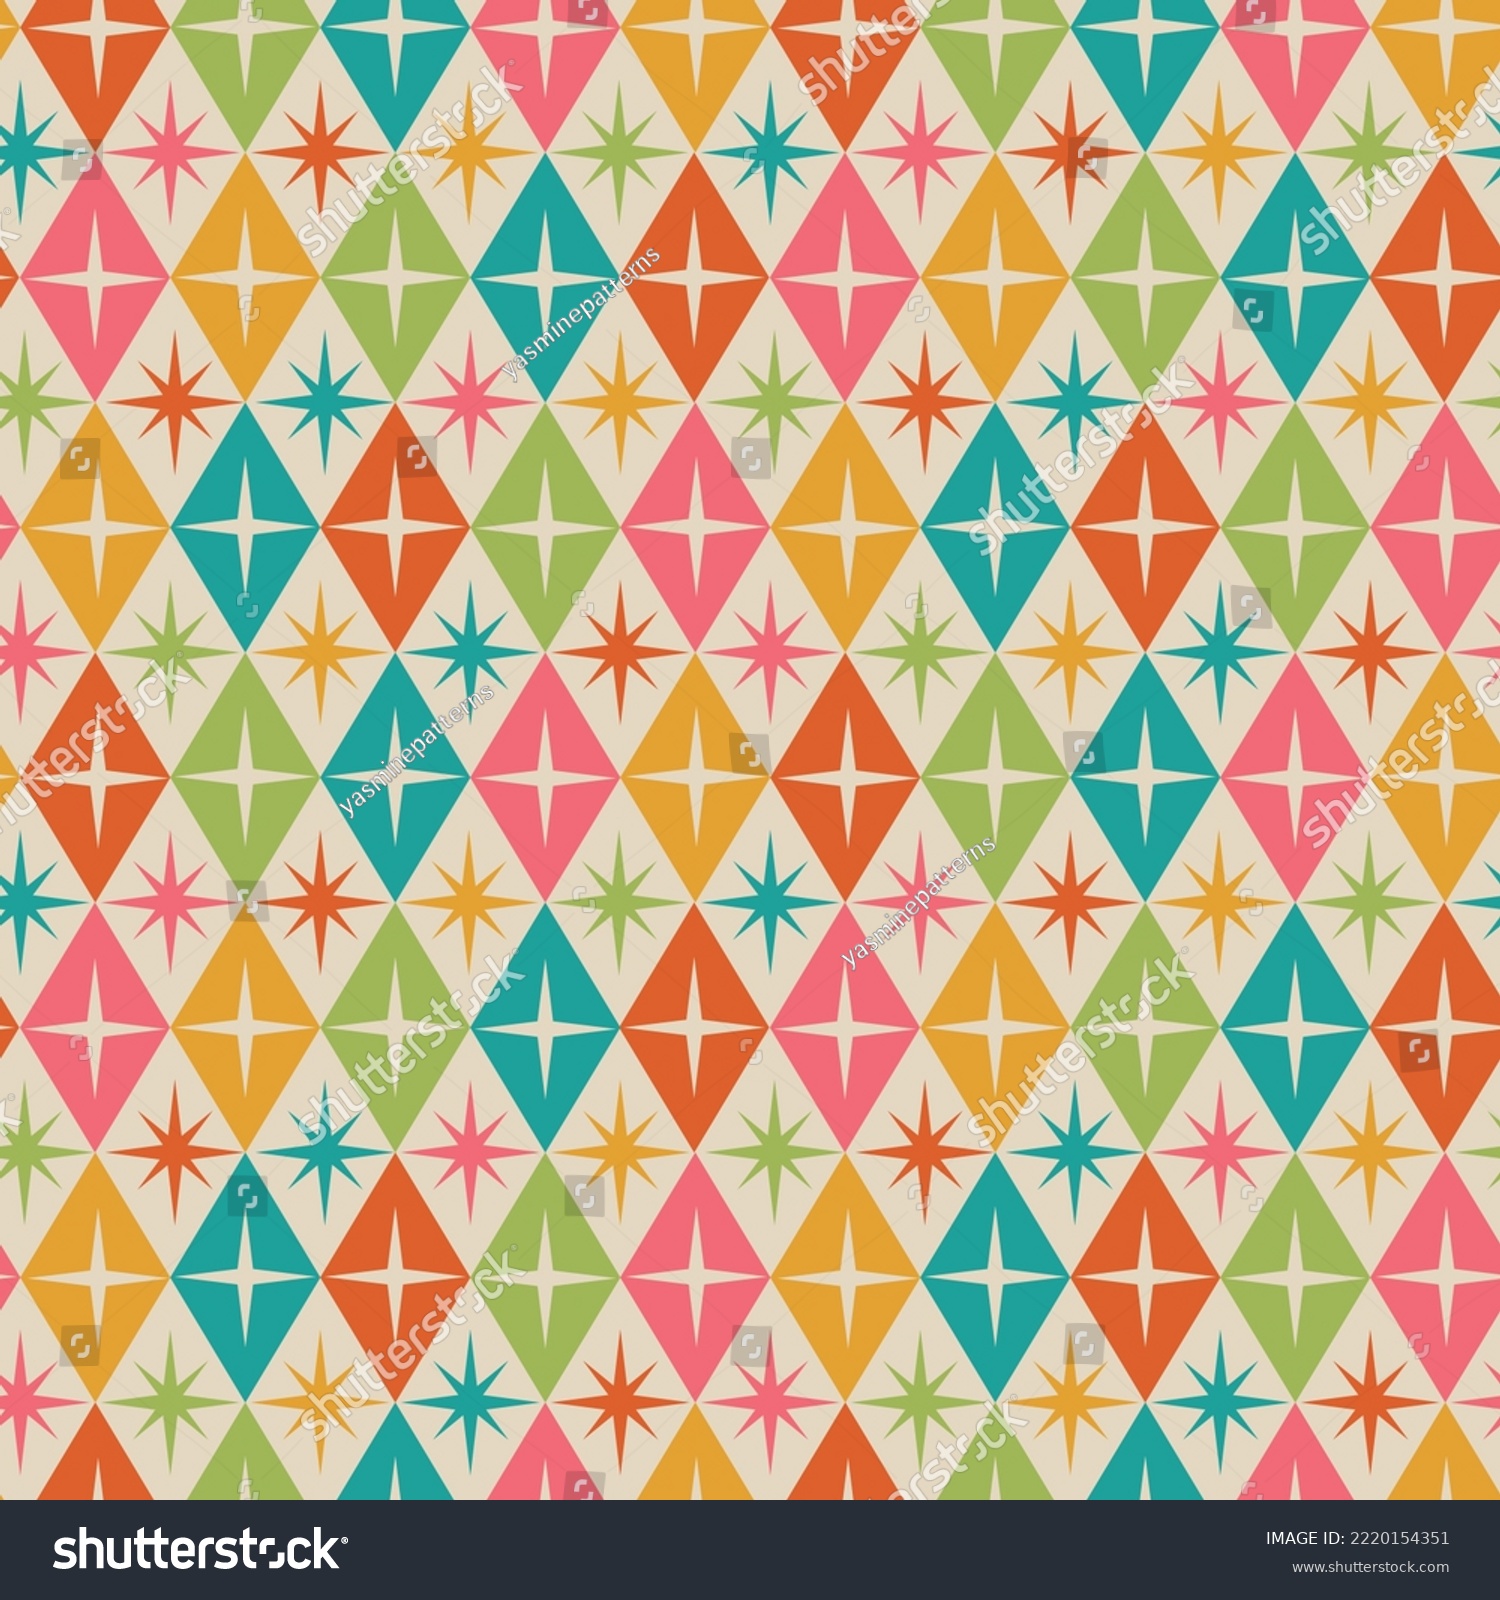 SVG of  Mid century modern atomic starburst on retro diamond shapes seamless pattern in teal, green, orange, pink and yellow. For home décor, textile and fabric svg